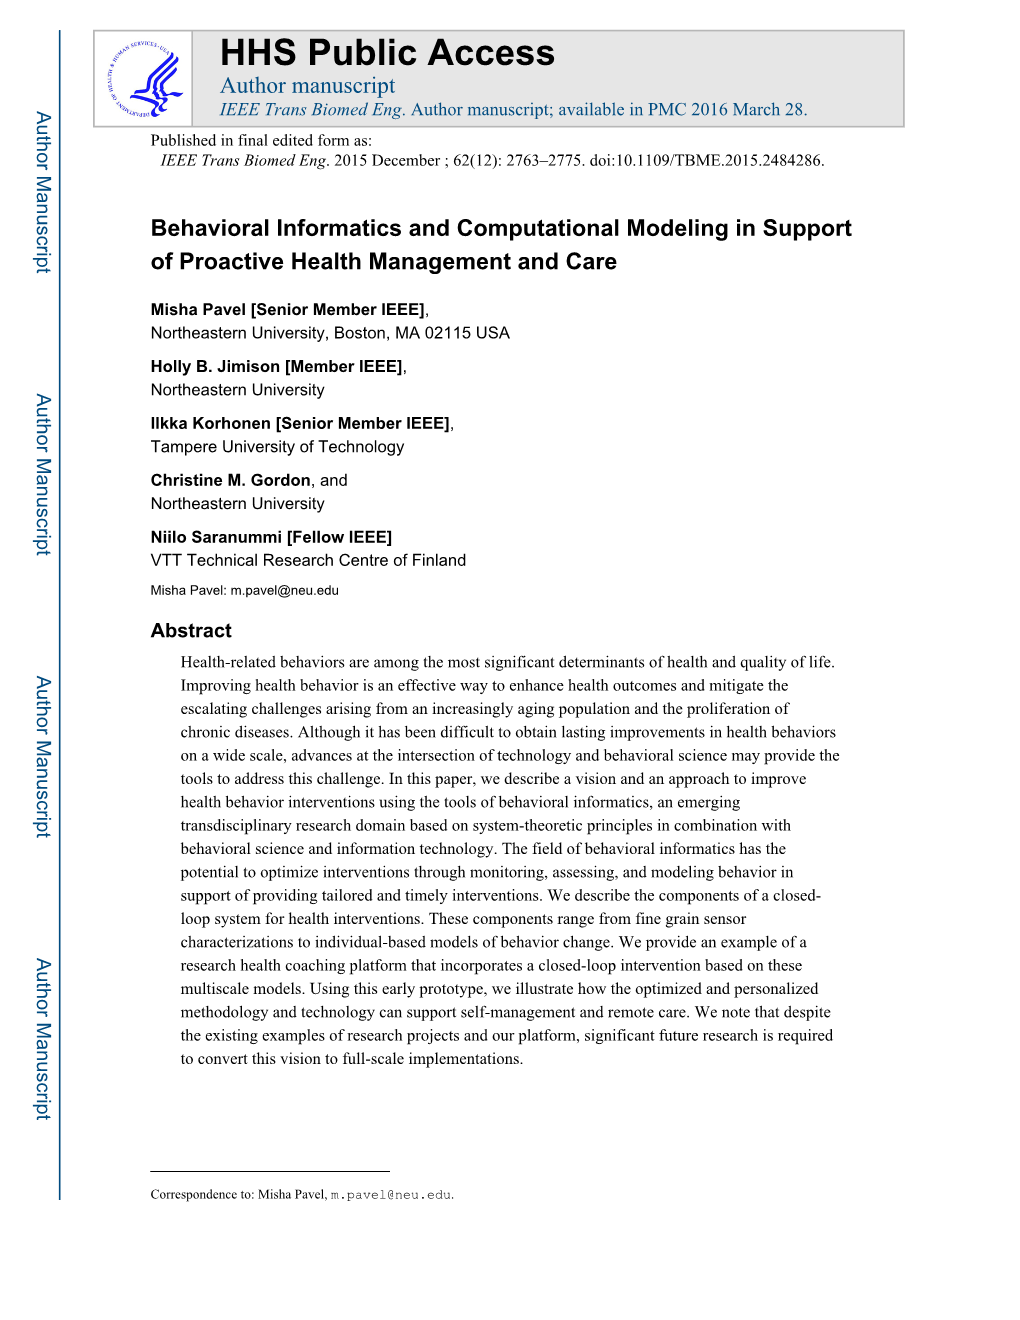 Behavioral Informatics and Computational Modeling in Support of Proactive Health Management and Care